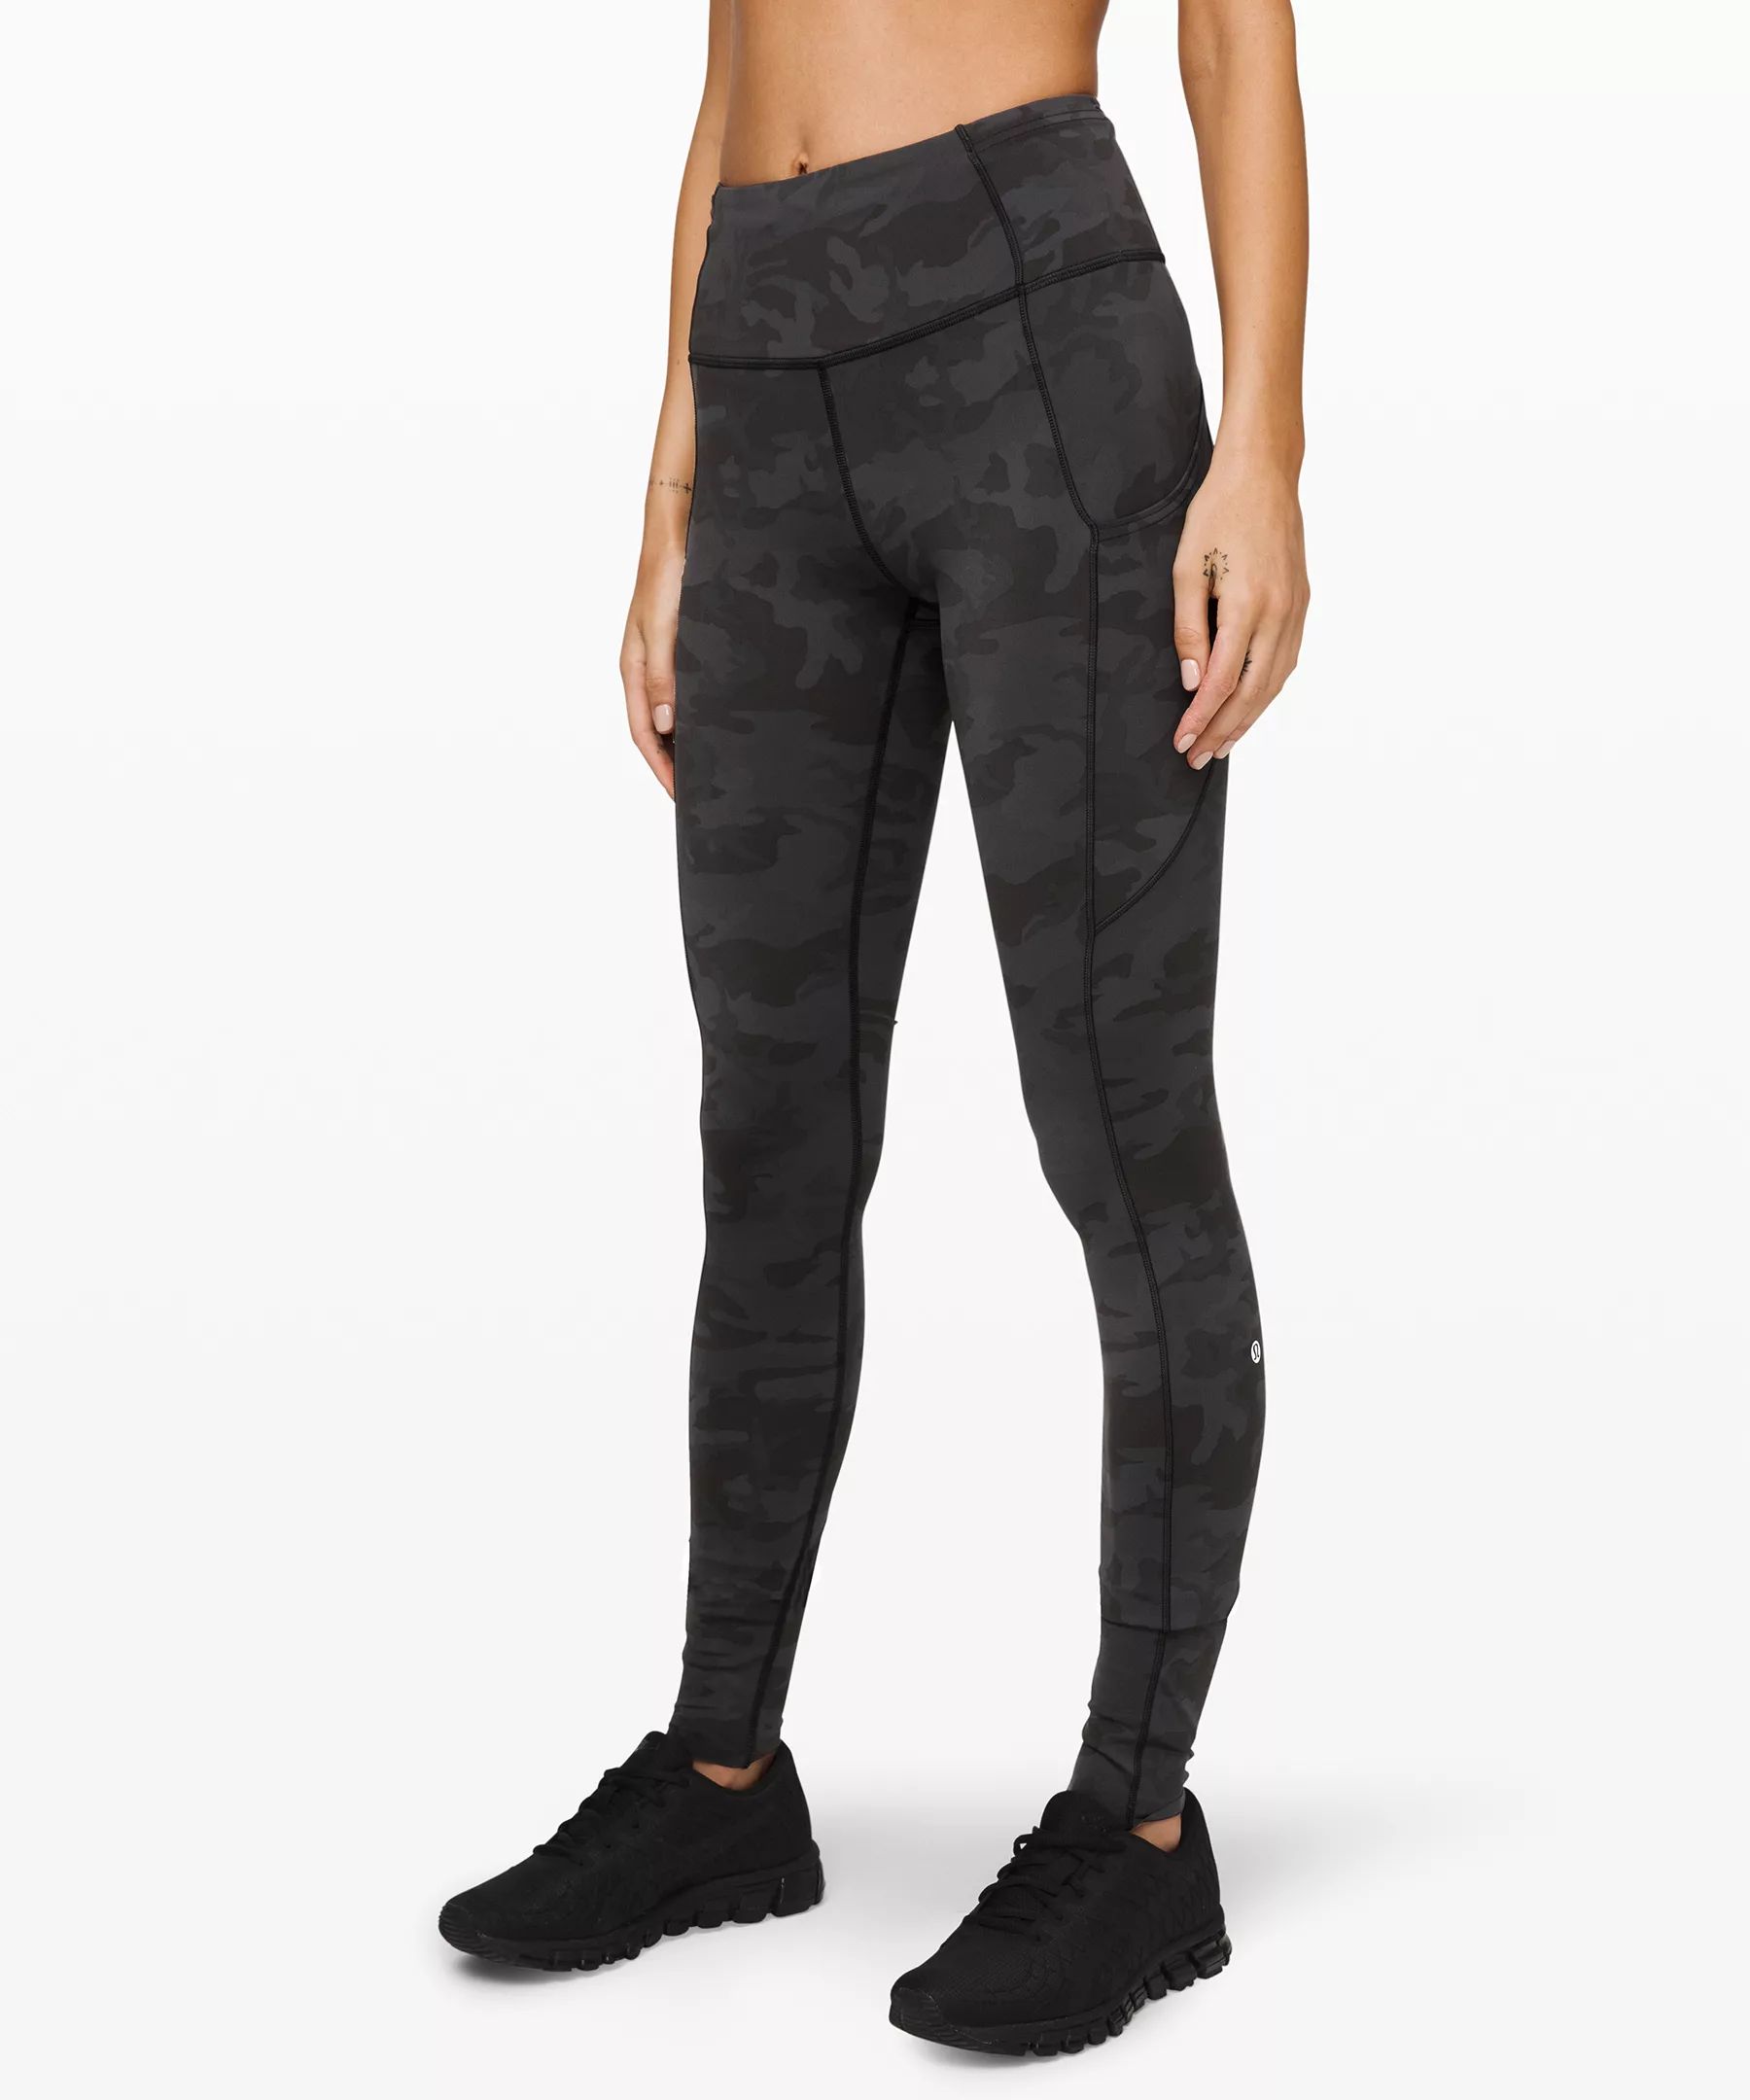 Fast and Free Tight 31" Non-Reflective Online Only | Lululemon (US)